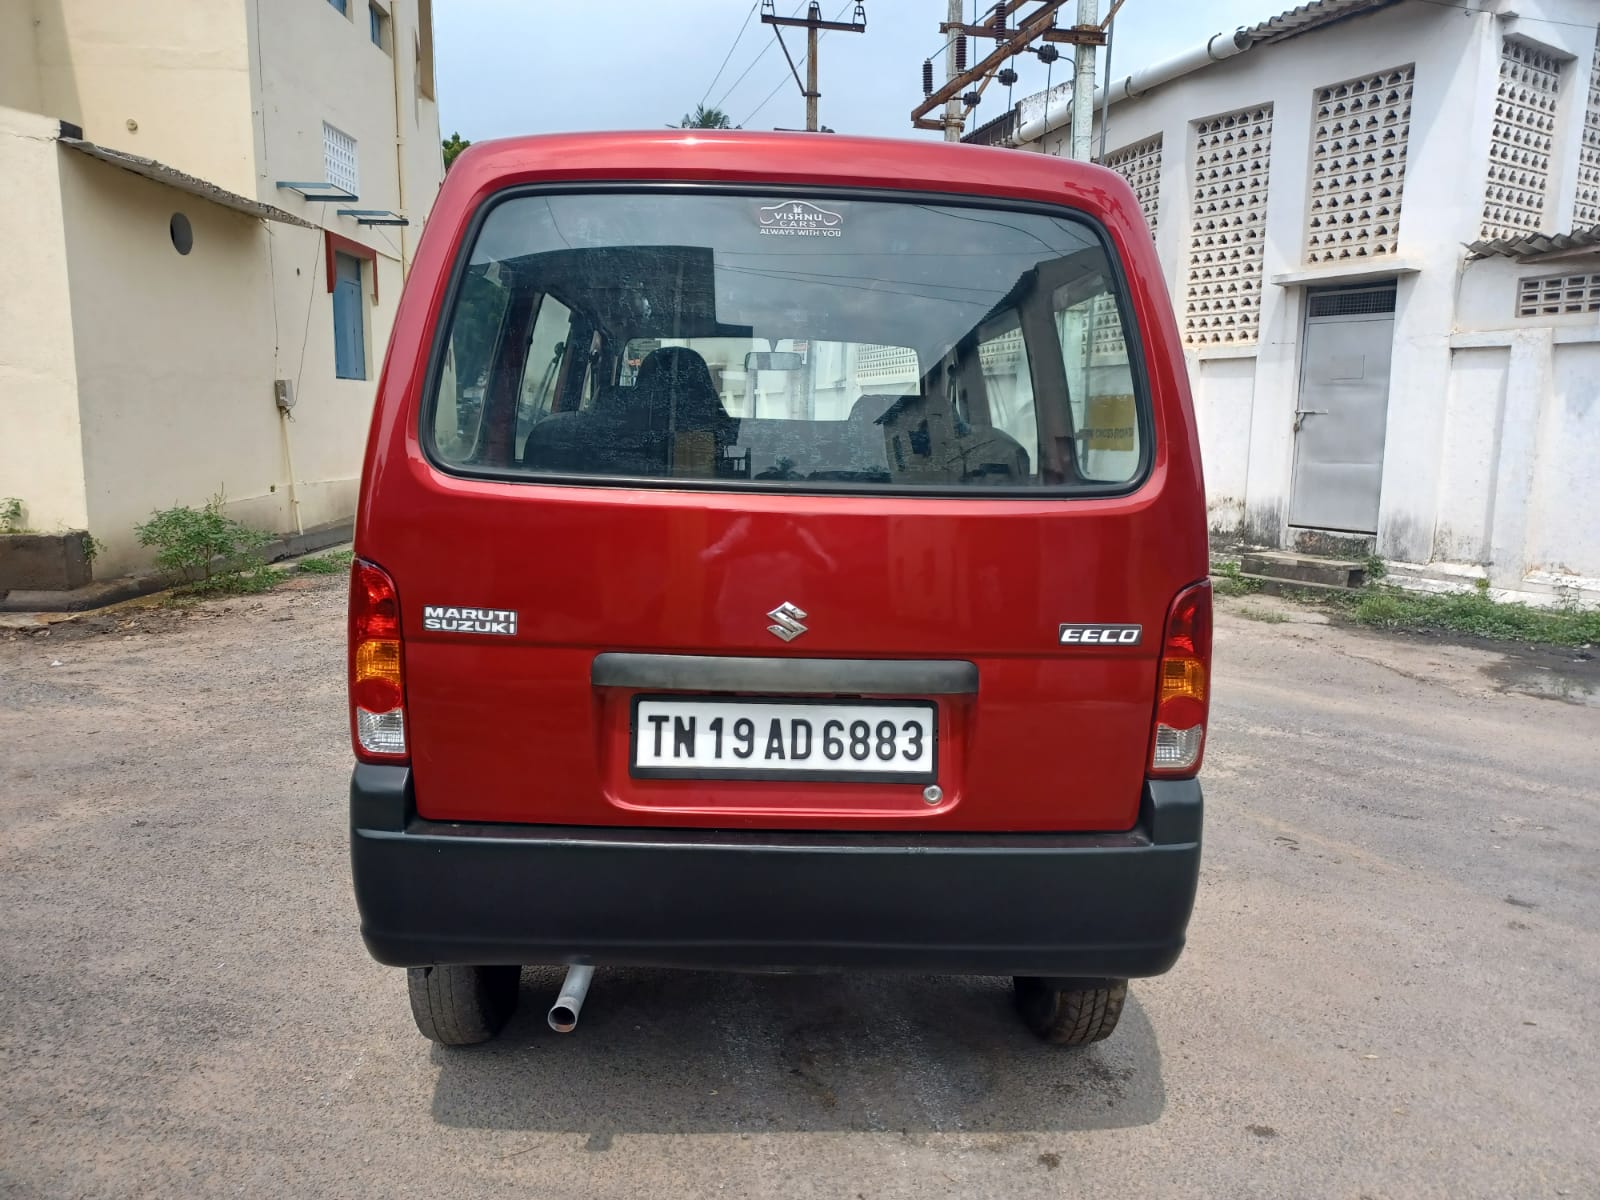 4662-for-sale-Maruthi-Suzuki-Eeco-Gas-First-Owner-2017-TN-registered-rs-415000